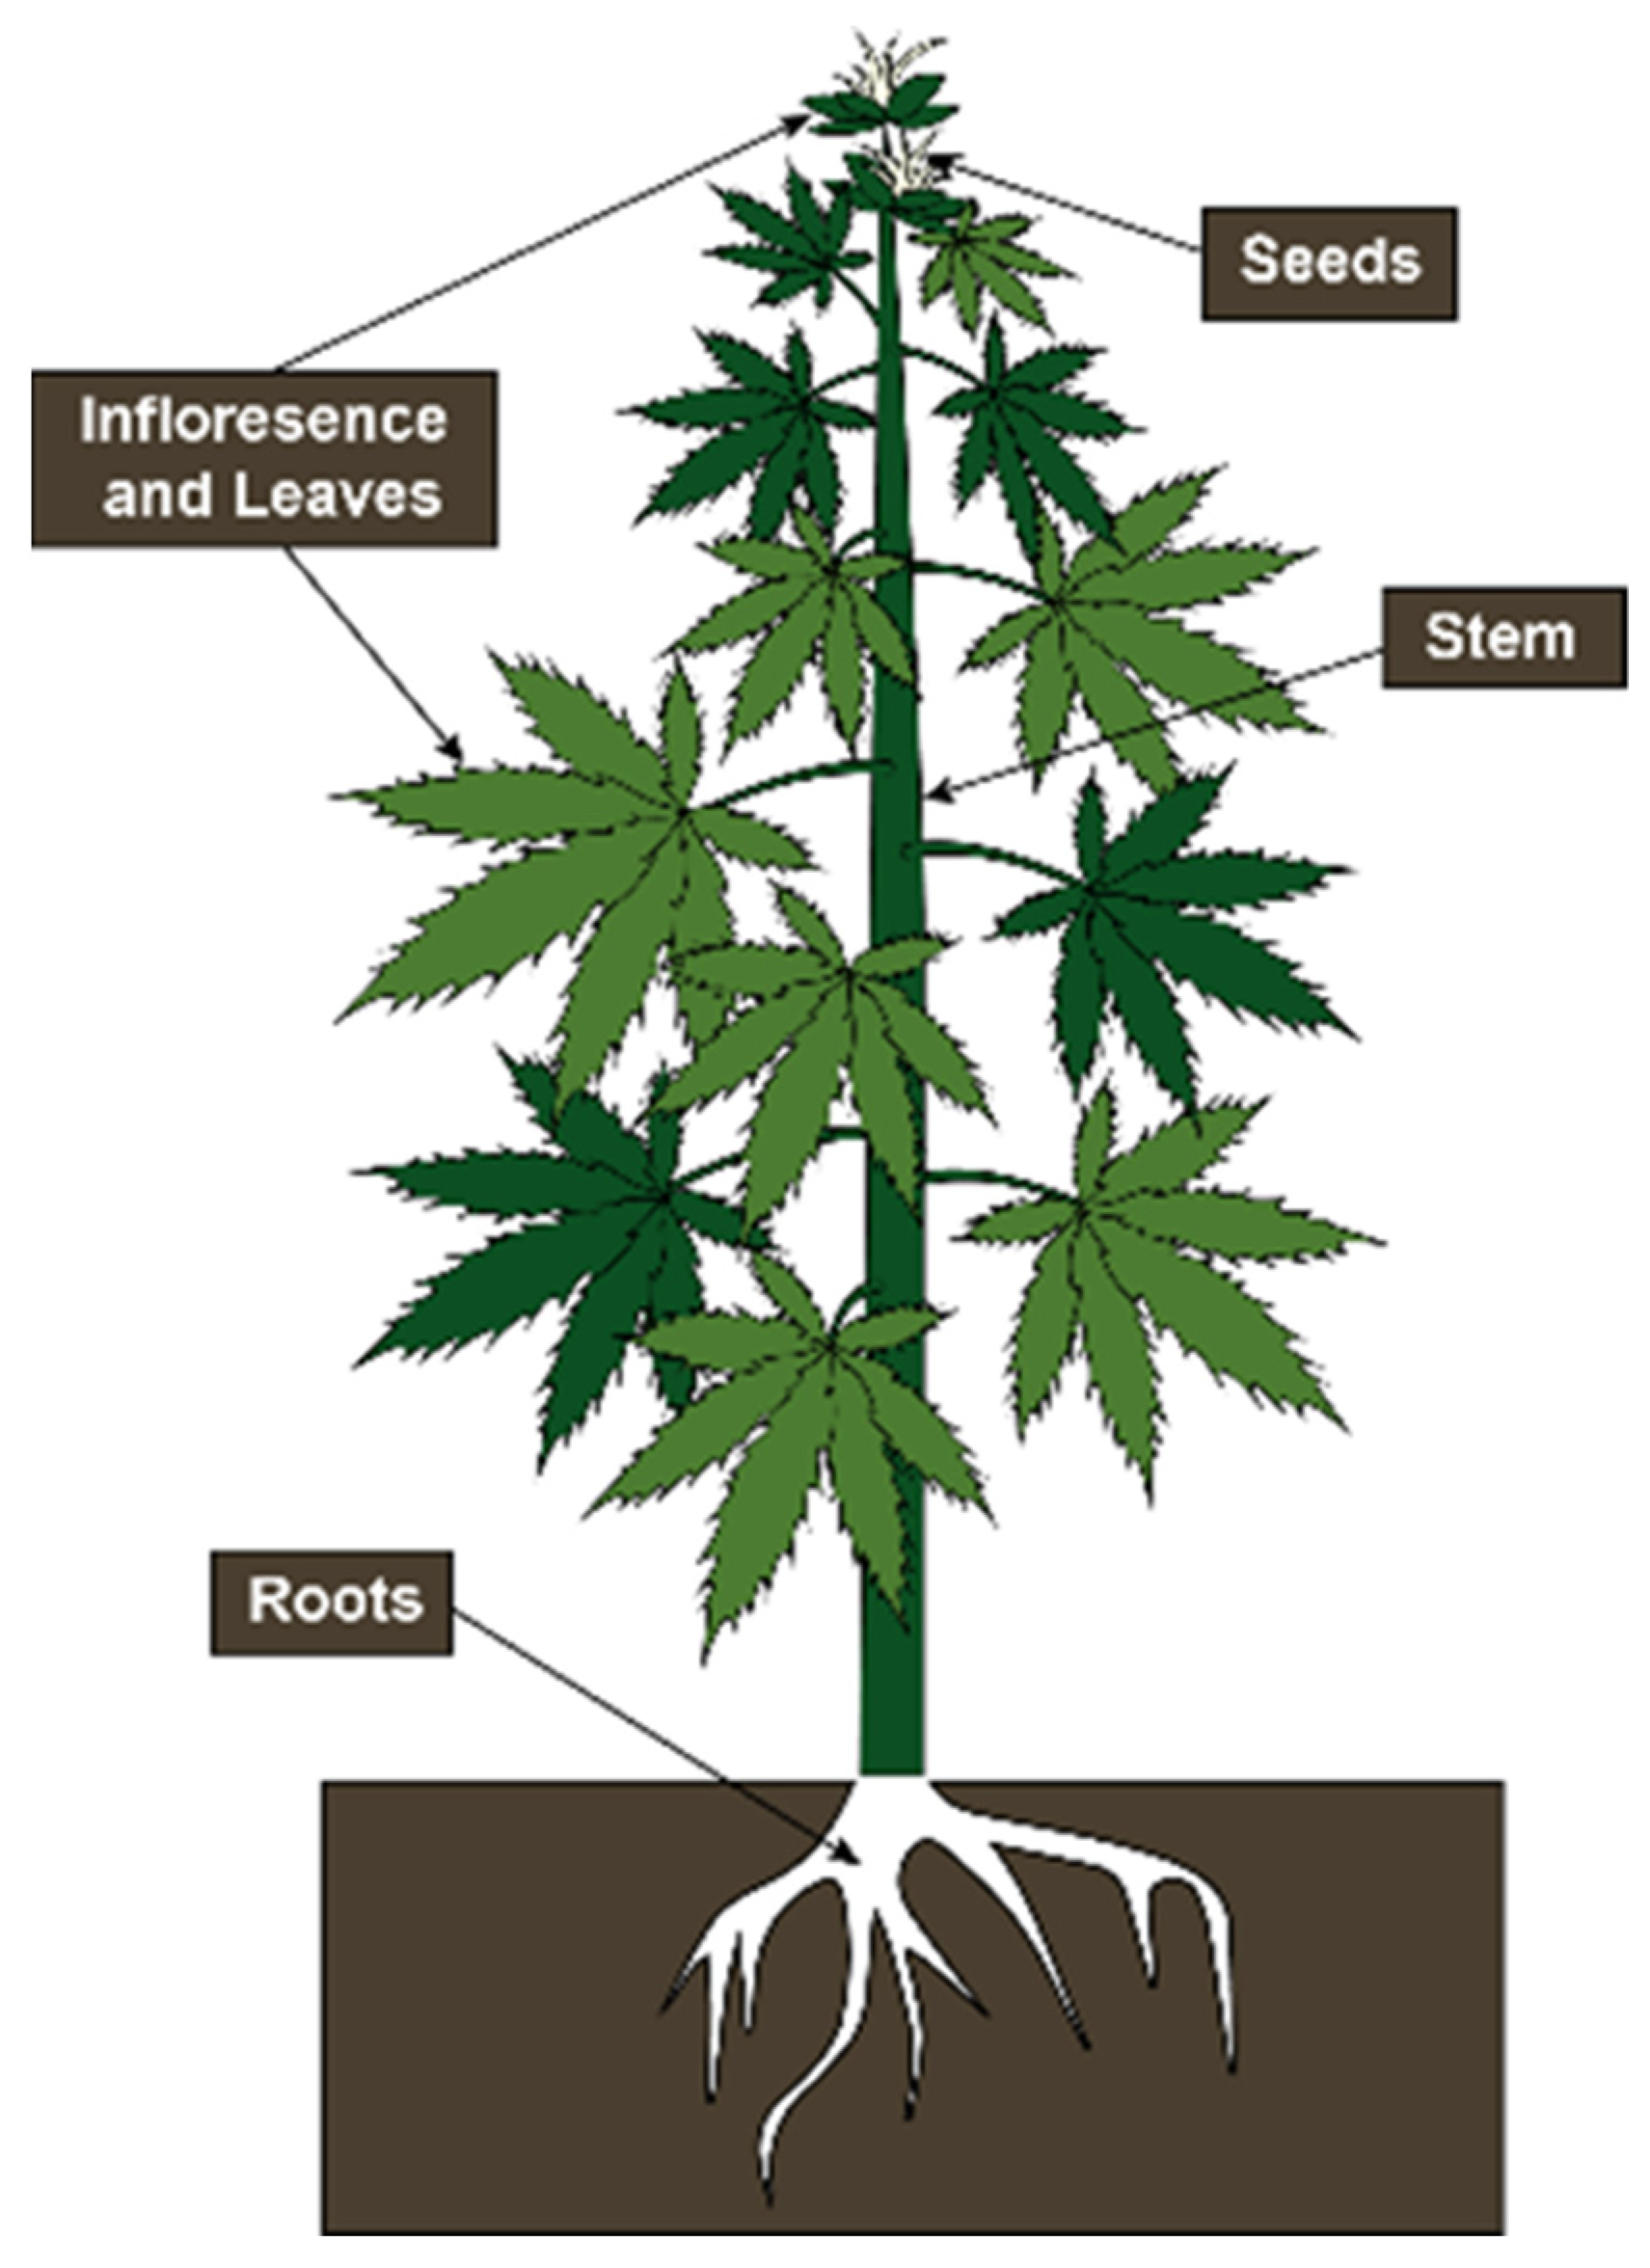 What is THCP? Exploring a Novel and Exciting Cannabinoid - Doja Hemp